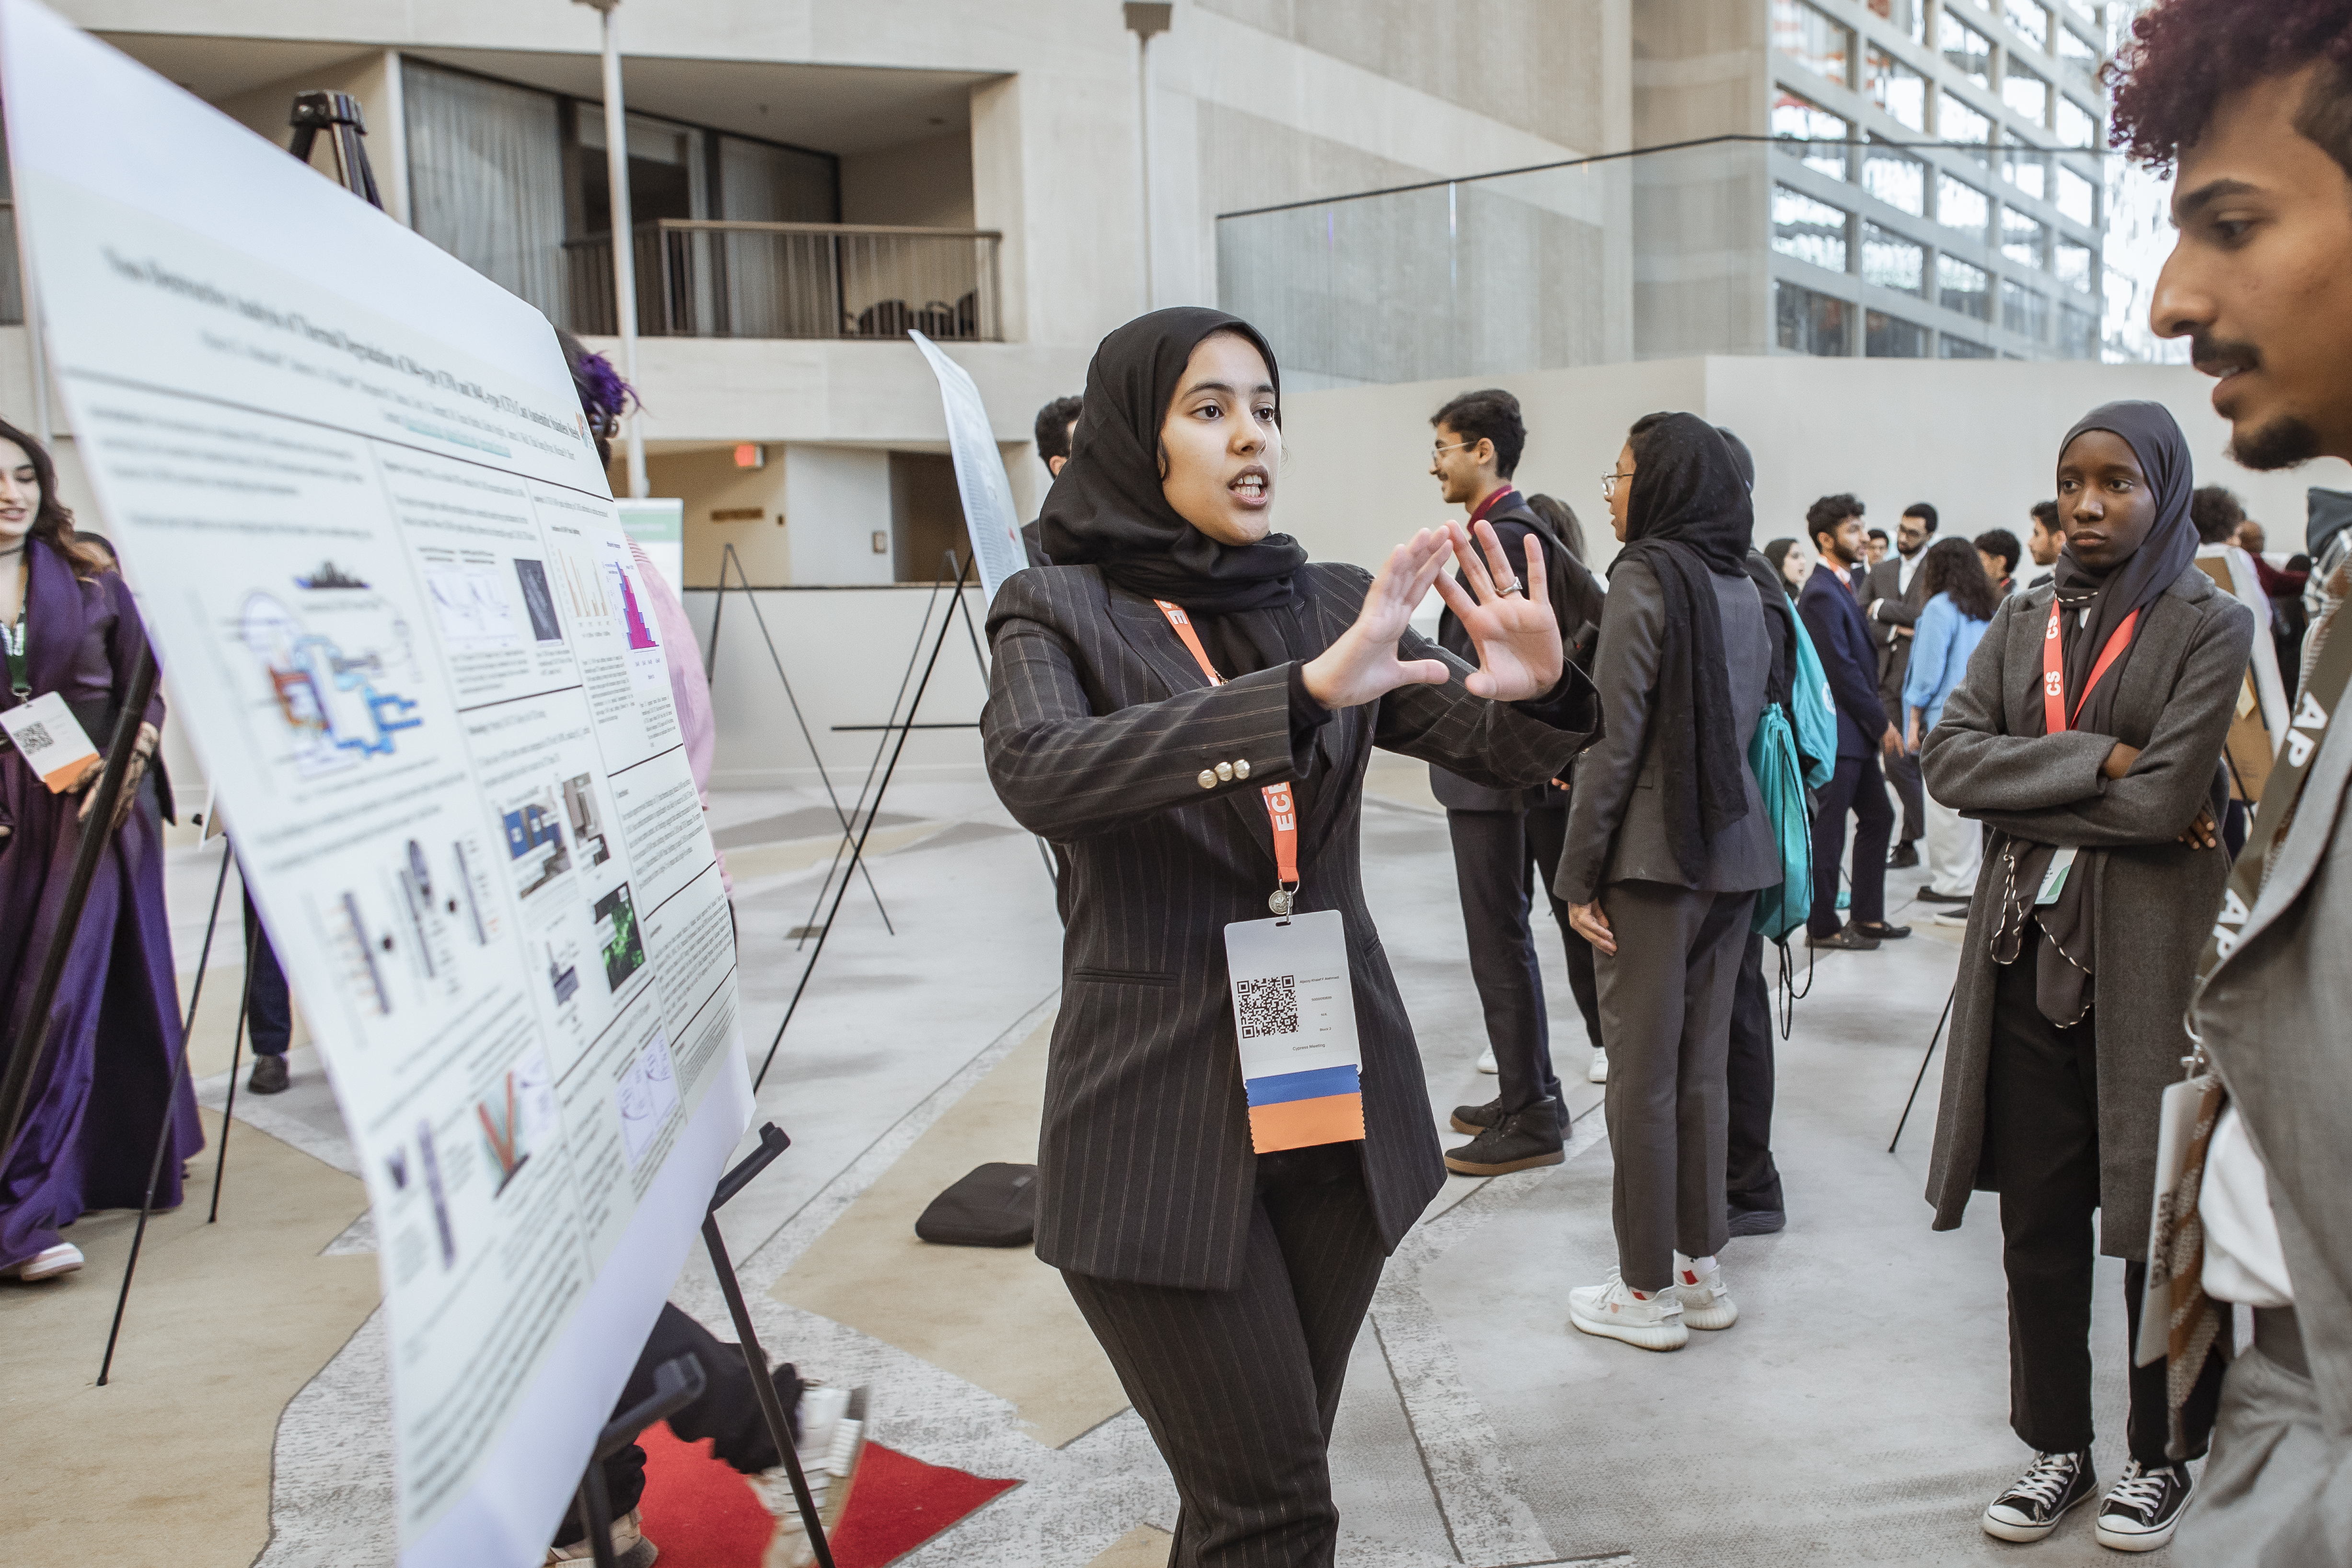 Image 5: KGSP Senior Aljazzy Alahmadi presenting her poster titled, “Non-Destructive Analysis of Thermal Degradation of 304-type (CF8) and 304L-type (CF3) Cast Austenitic Stainless Steels” at the Student Enrichment and Research Fair. 